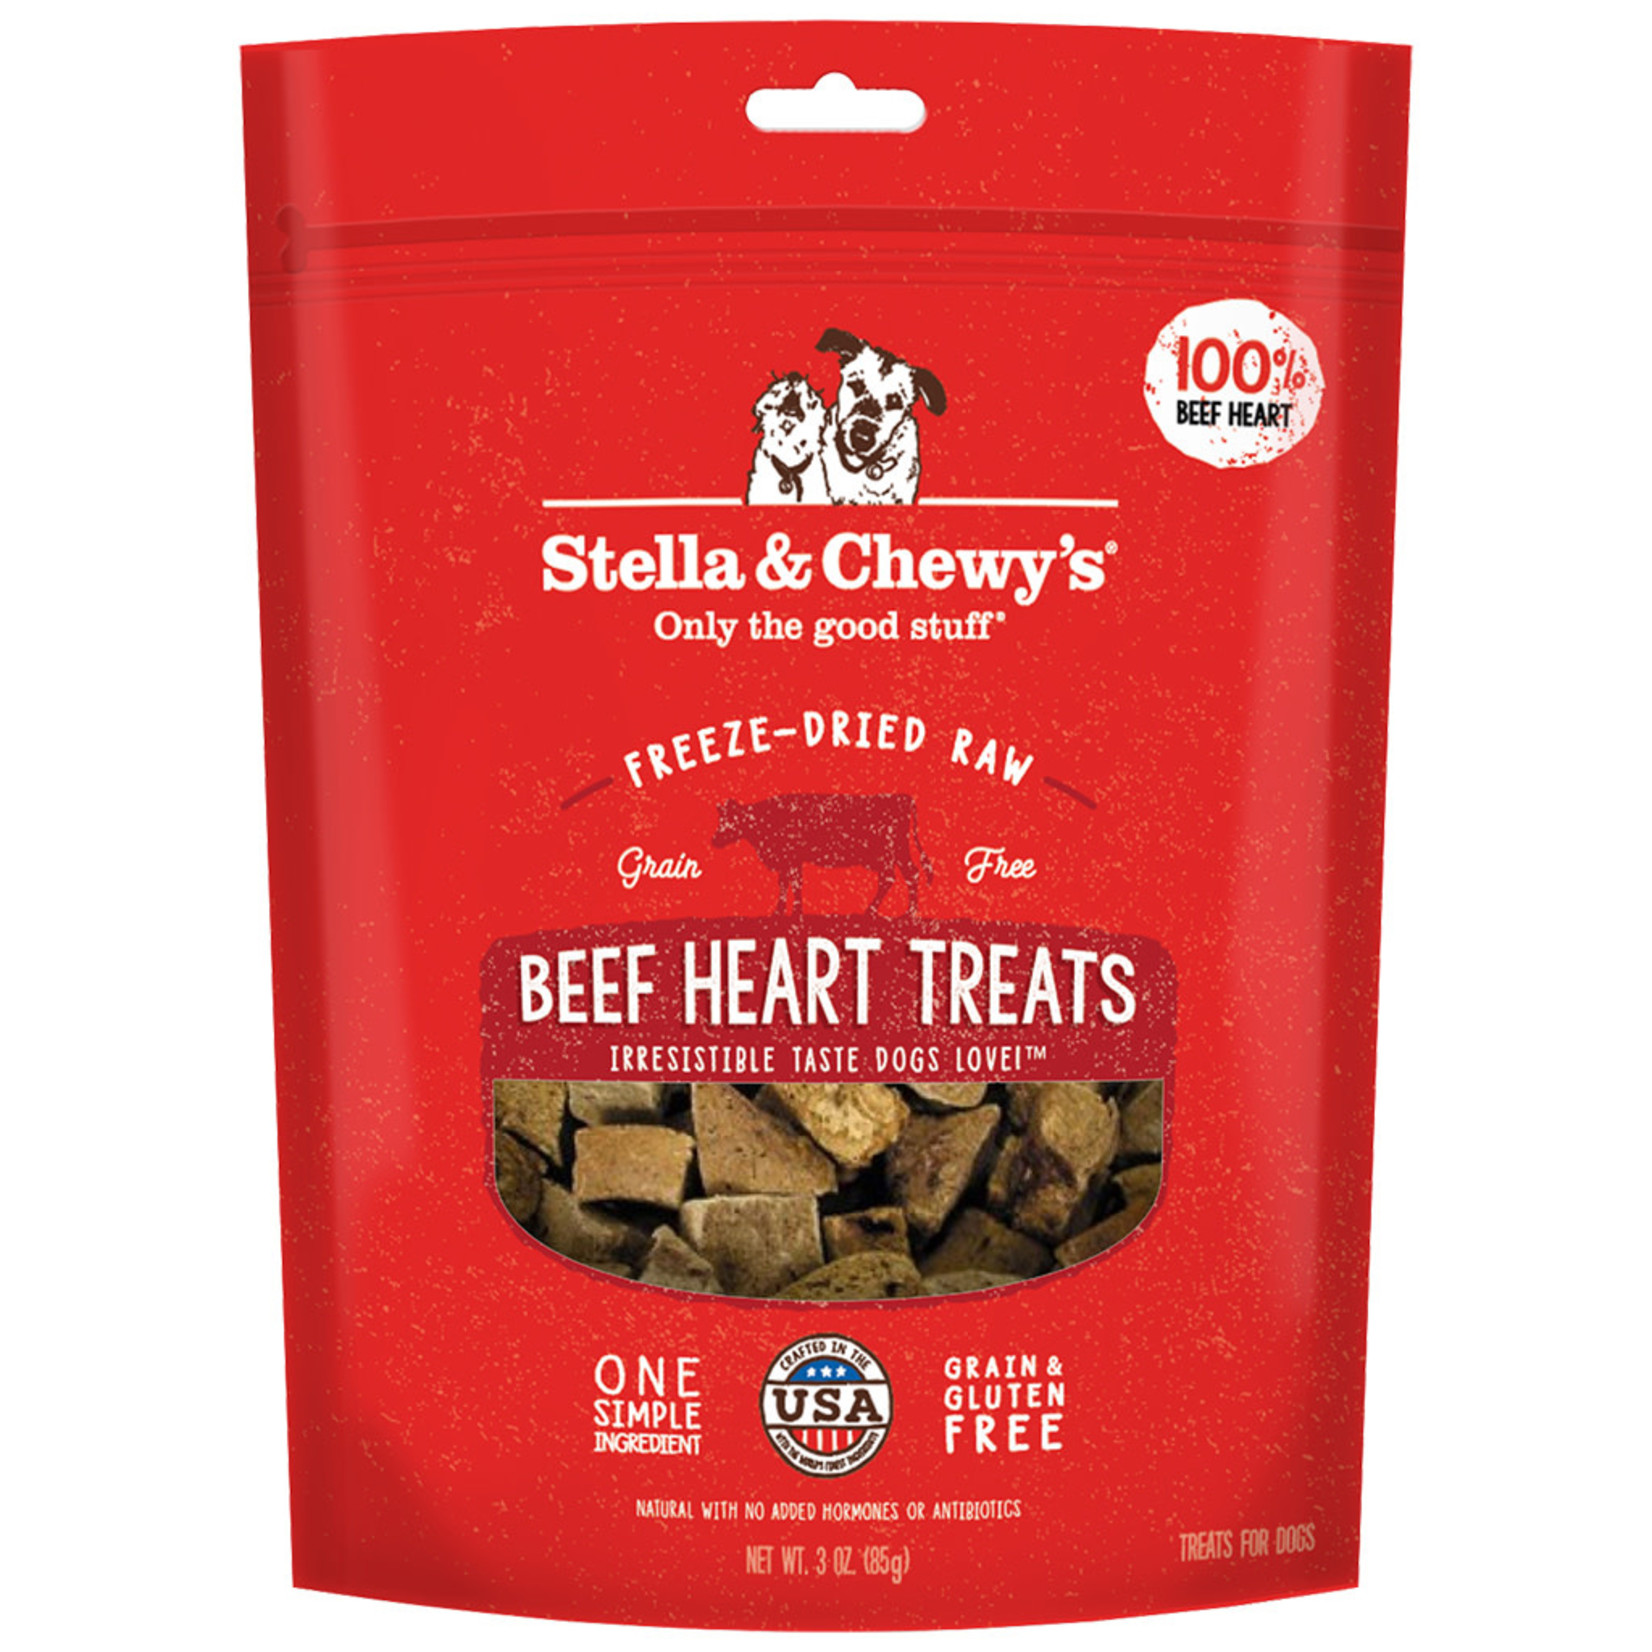 Stella & chewy's stela and chewys FD Beef Heart Treats 3OZ (8)